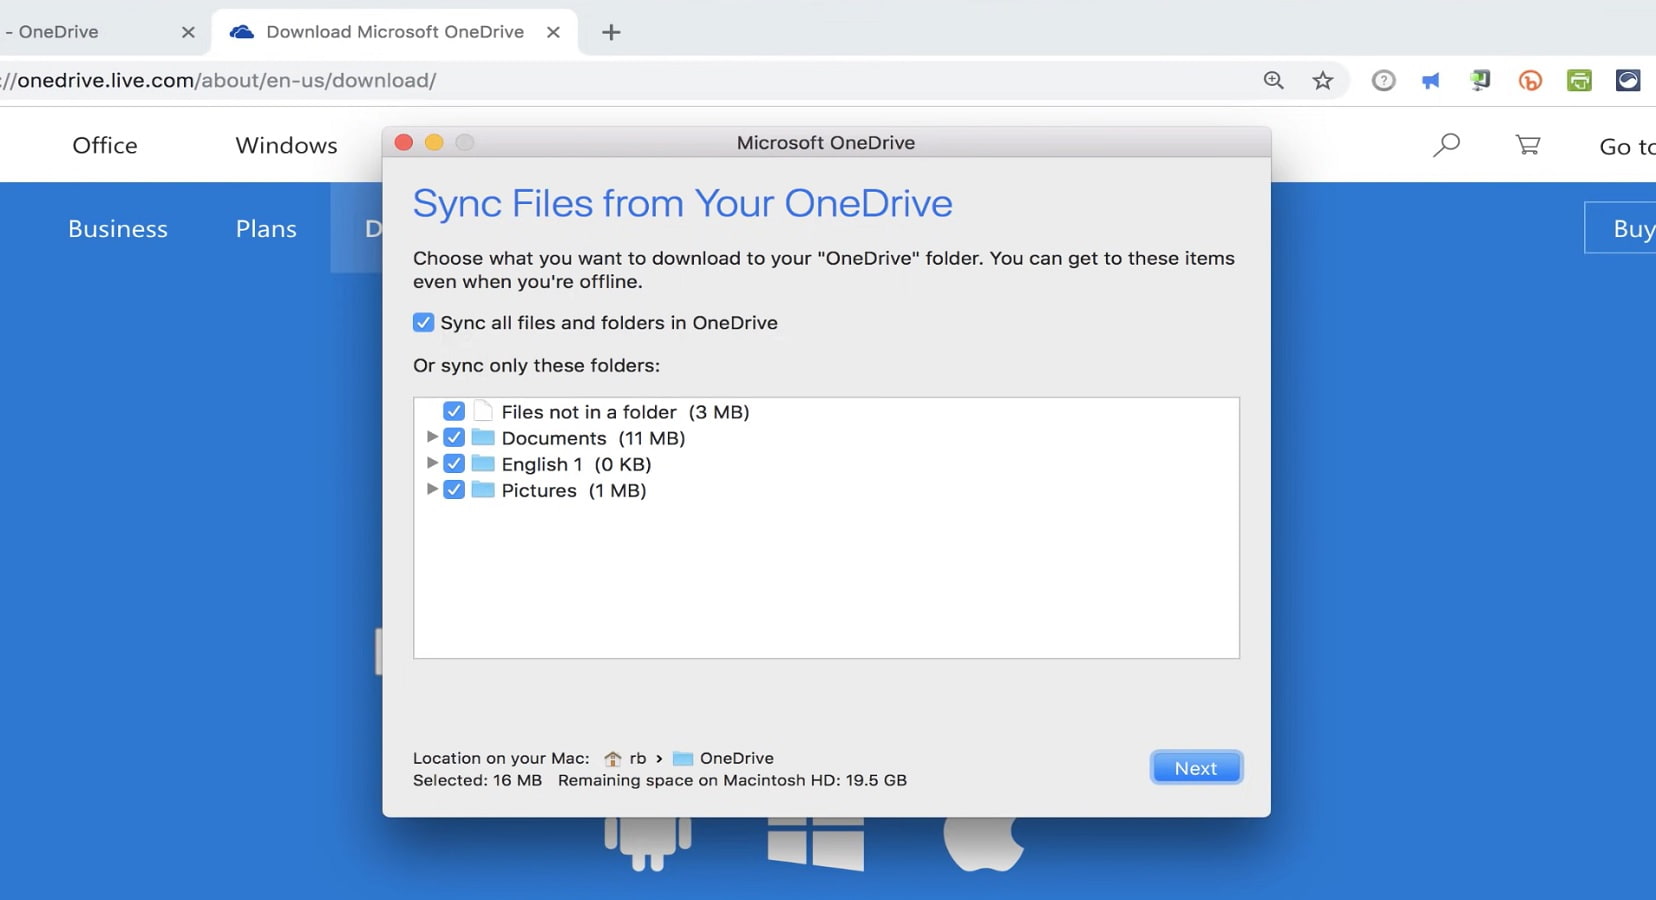 You can select the files you want to sync.